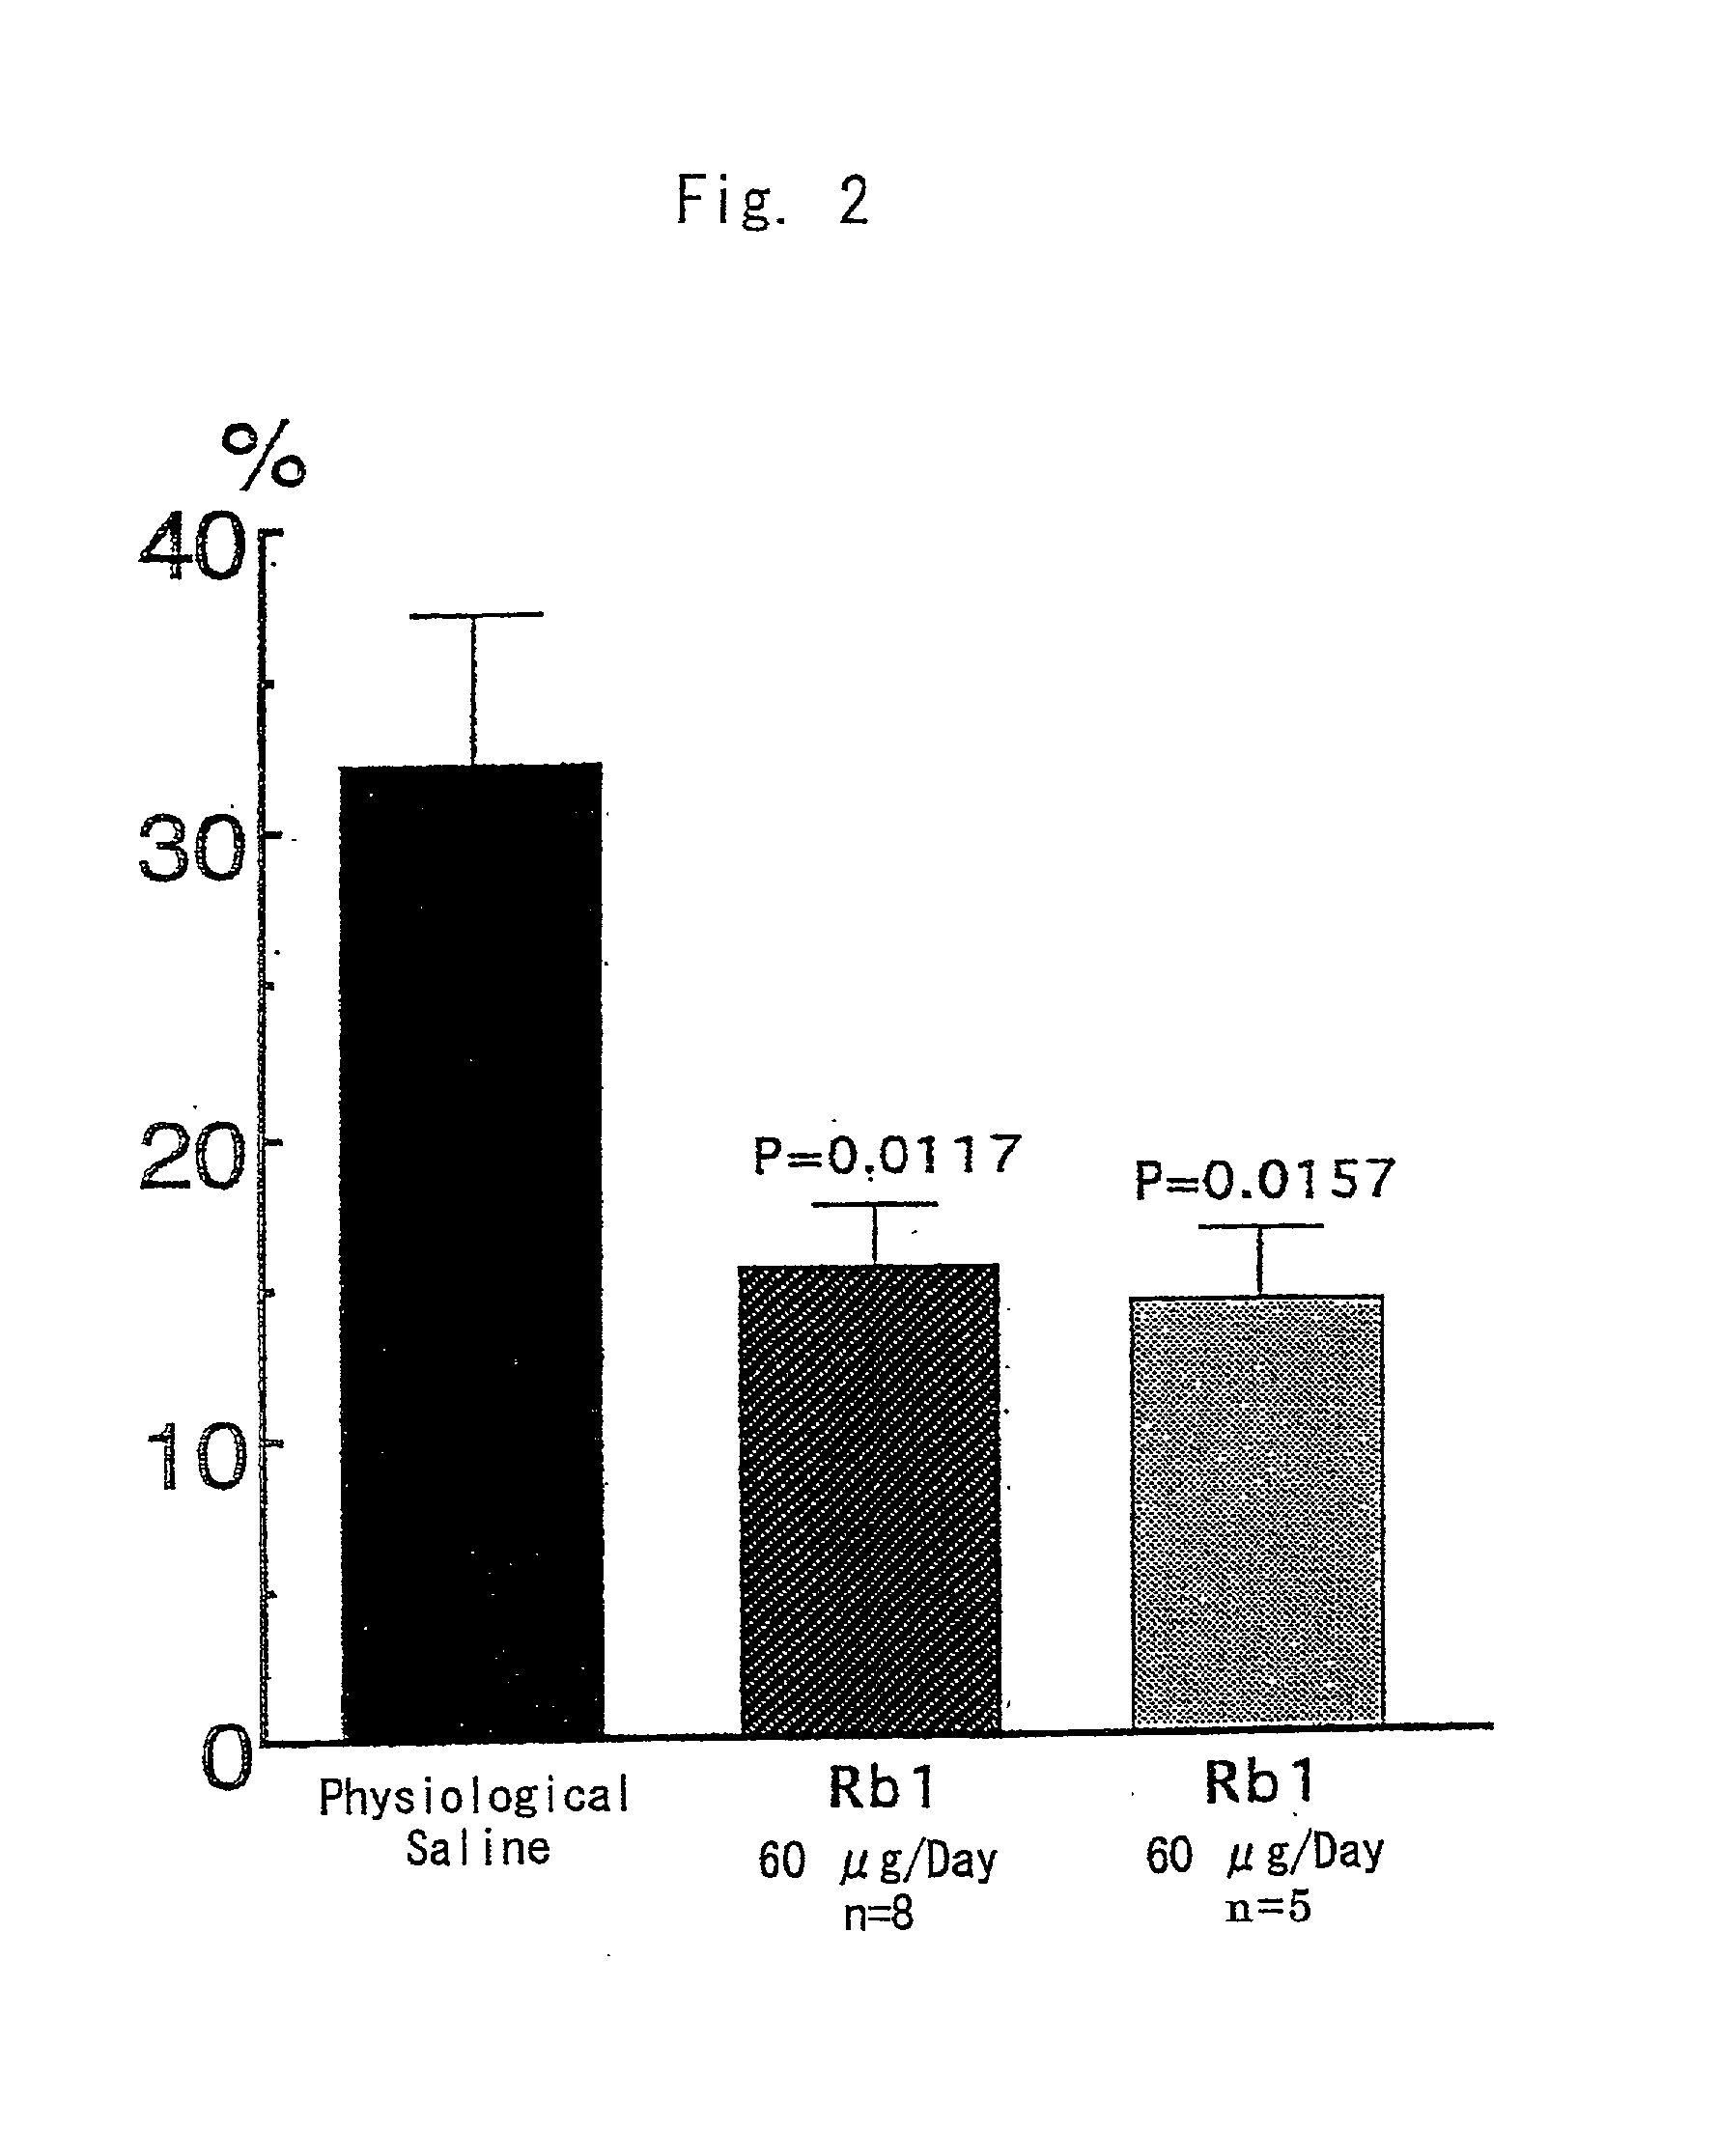 Brain cell or nerve cell-protective agents comprising ginsenoside Rb1